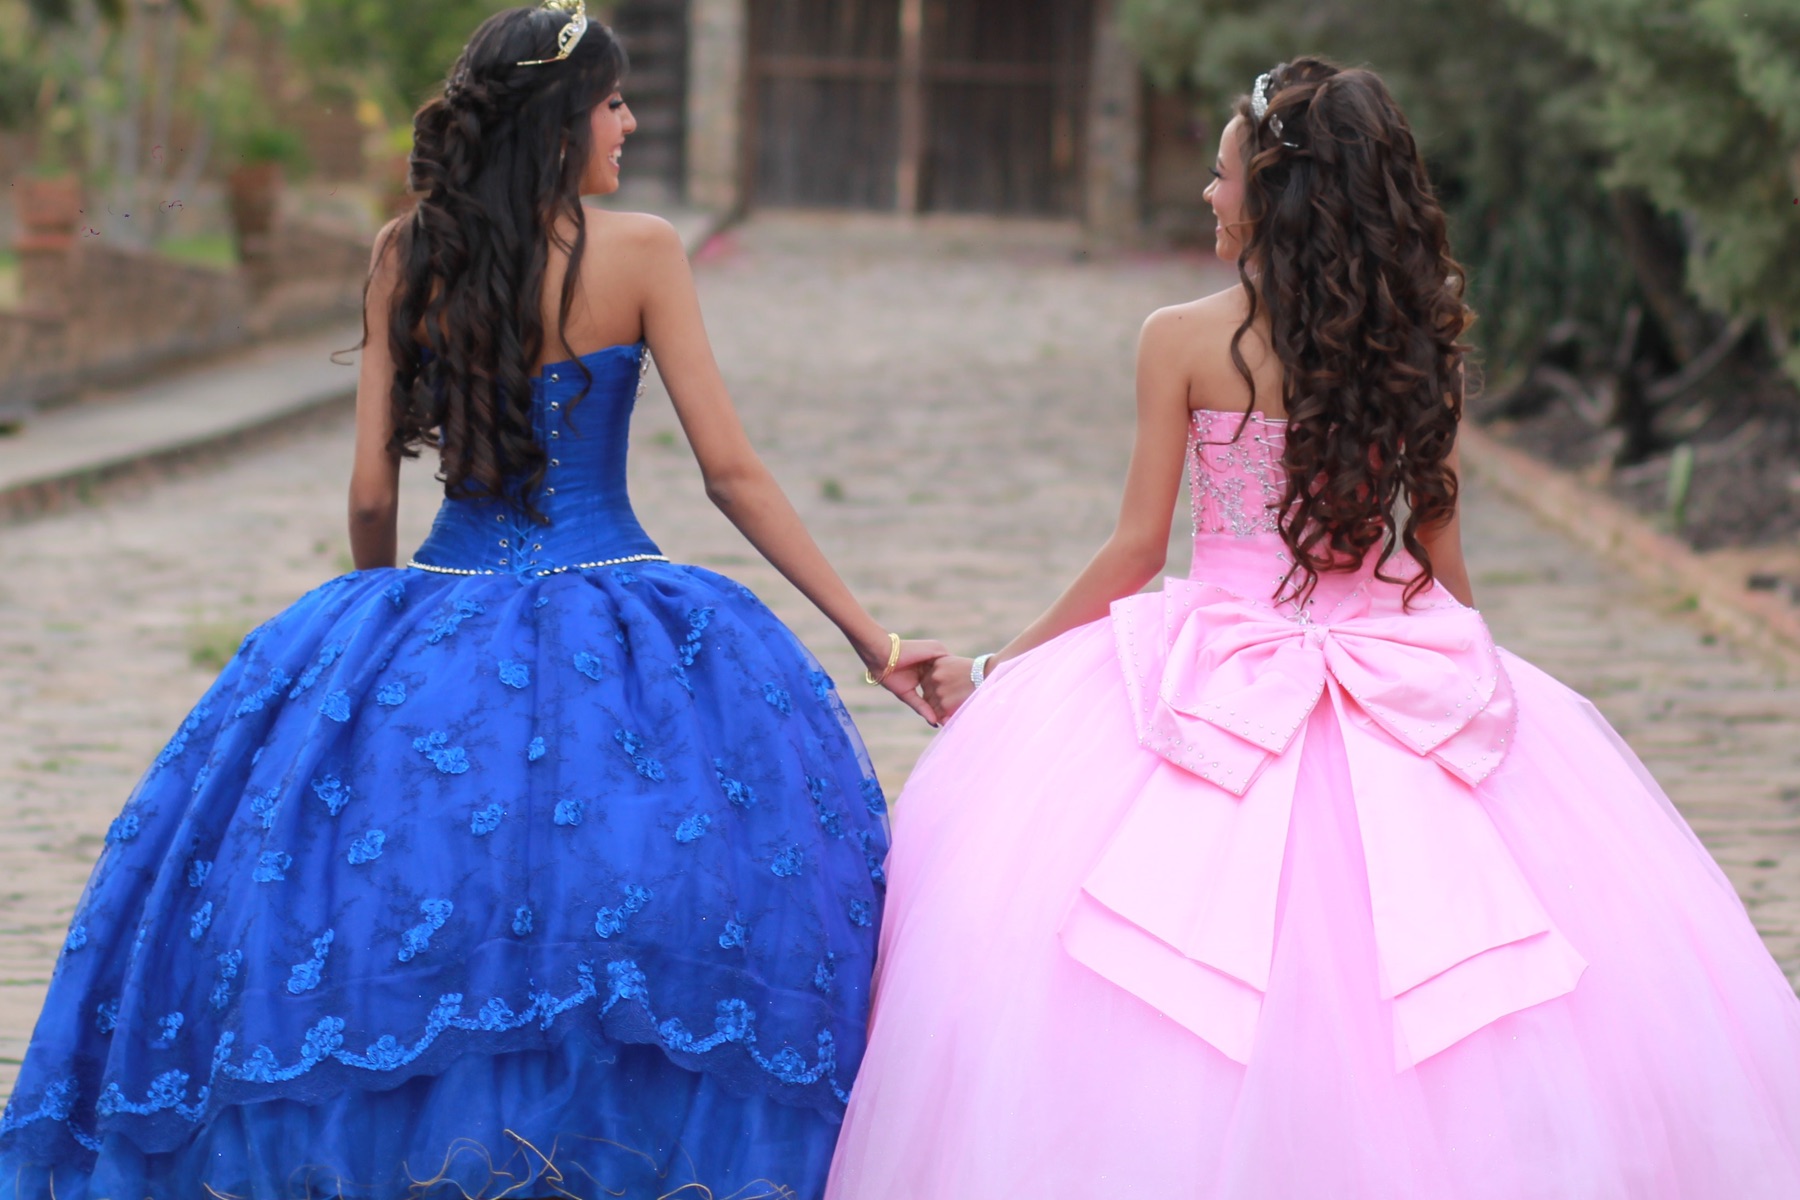 Photo of two young girls holding hands and wearing blue and pink ball gowns